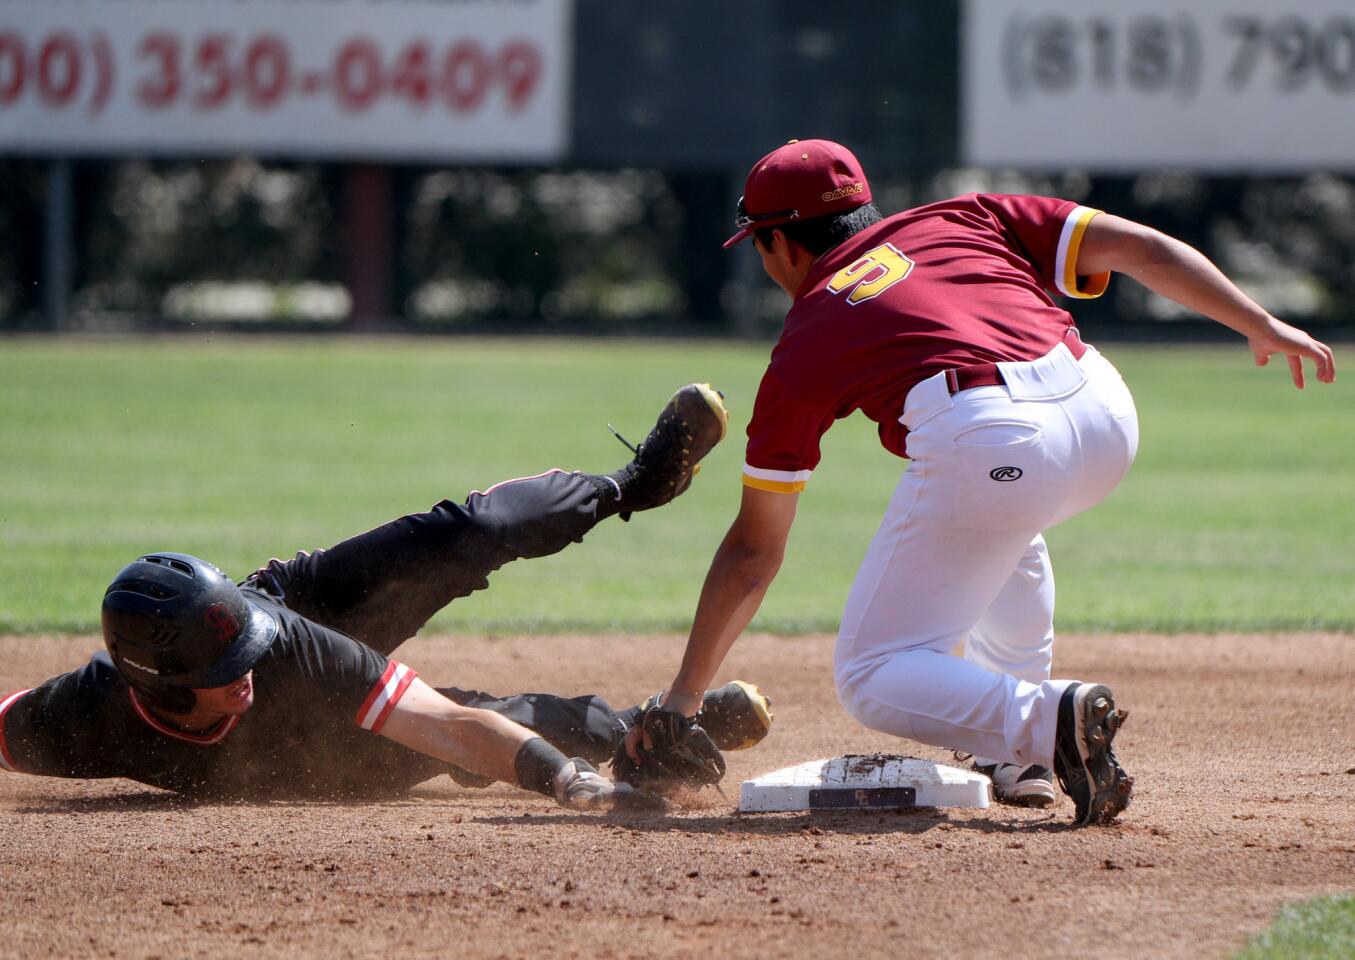 Glendale Community College baseball shortstop Lucas Sakay gets the out as #3 Nicholas Prainito sides past second base in home game vs. Santa Barbara City College, in game one of round one of the California Community College Athletic Association Southern California Baseball Regional Championships at Stengel Field in Glendale on Friday, May 3, 2019.